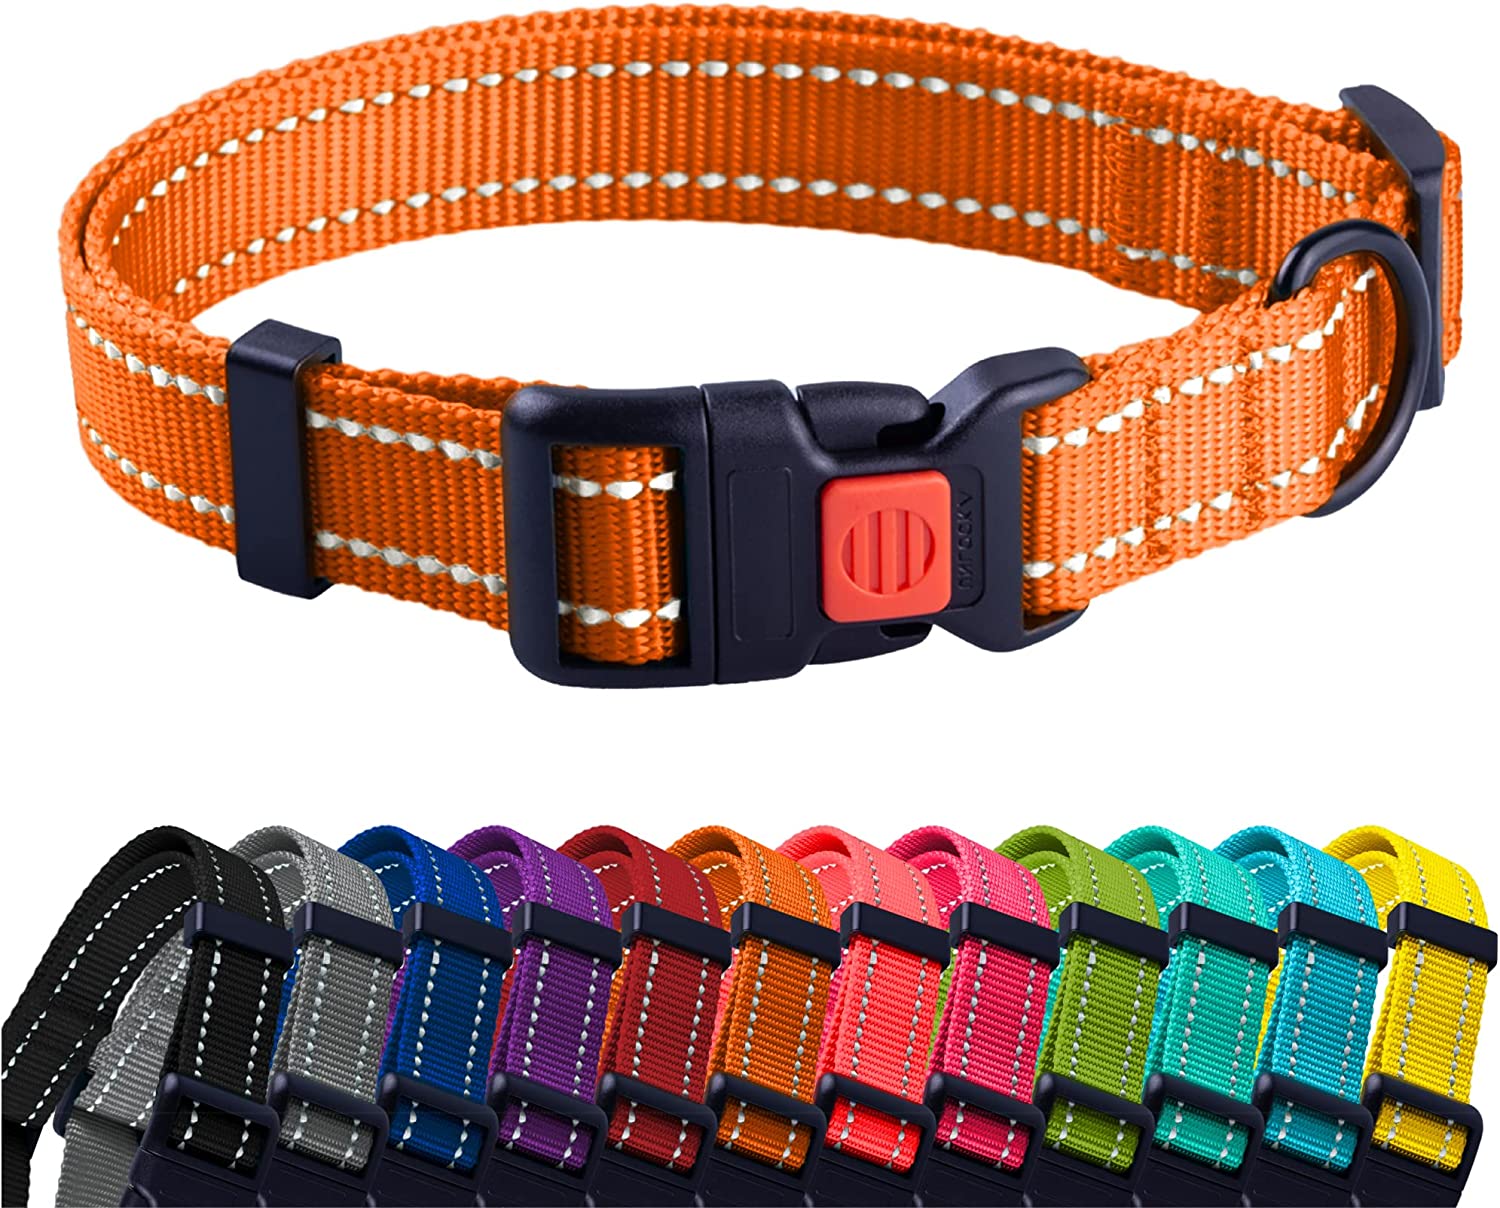 CollarDirect Reflective Dog Collar Safety Nylon Collars for X Large Dogs with Buckle, Orange - image 1 of 7